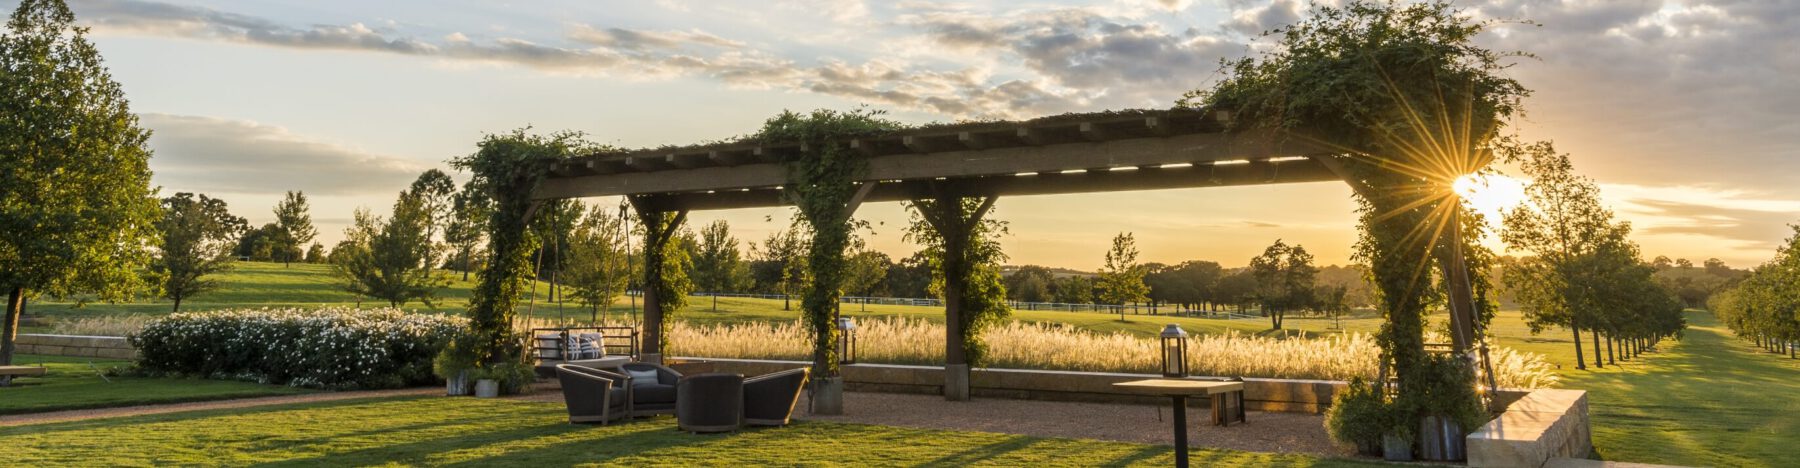 The outdoor pergola looking out over the sunset at the Hillwood headquarters in Dallas, Texas